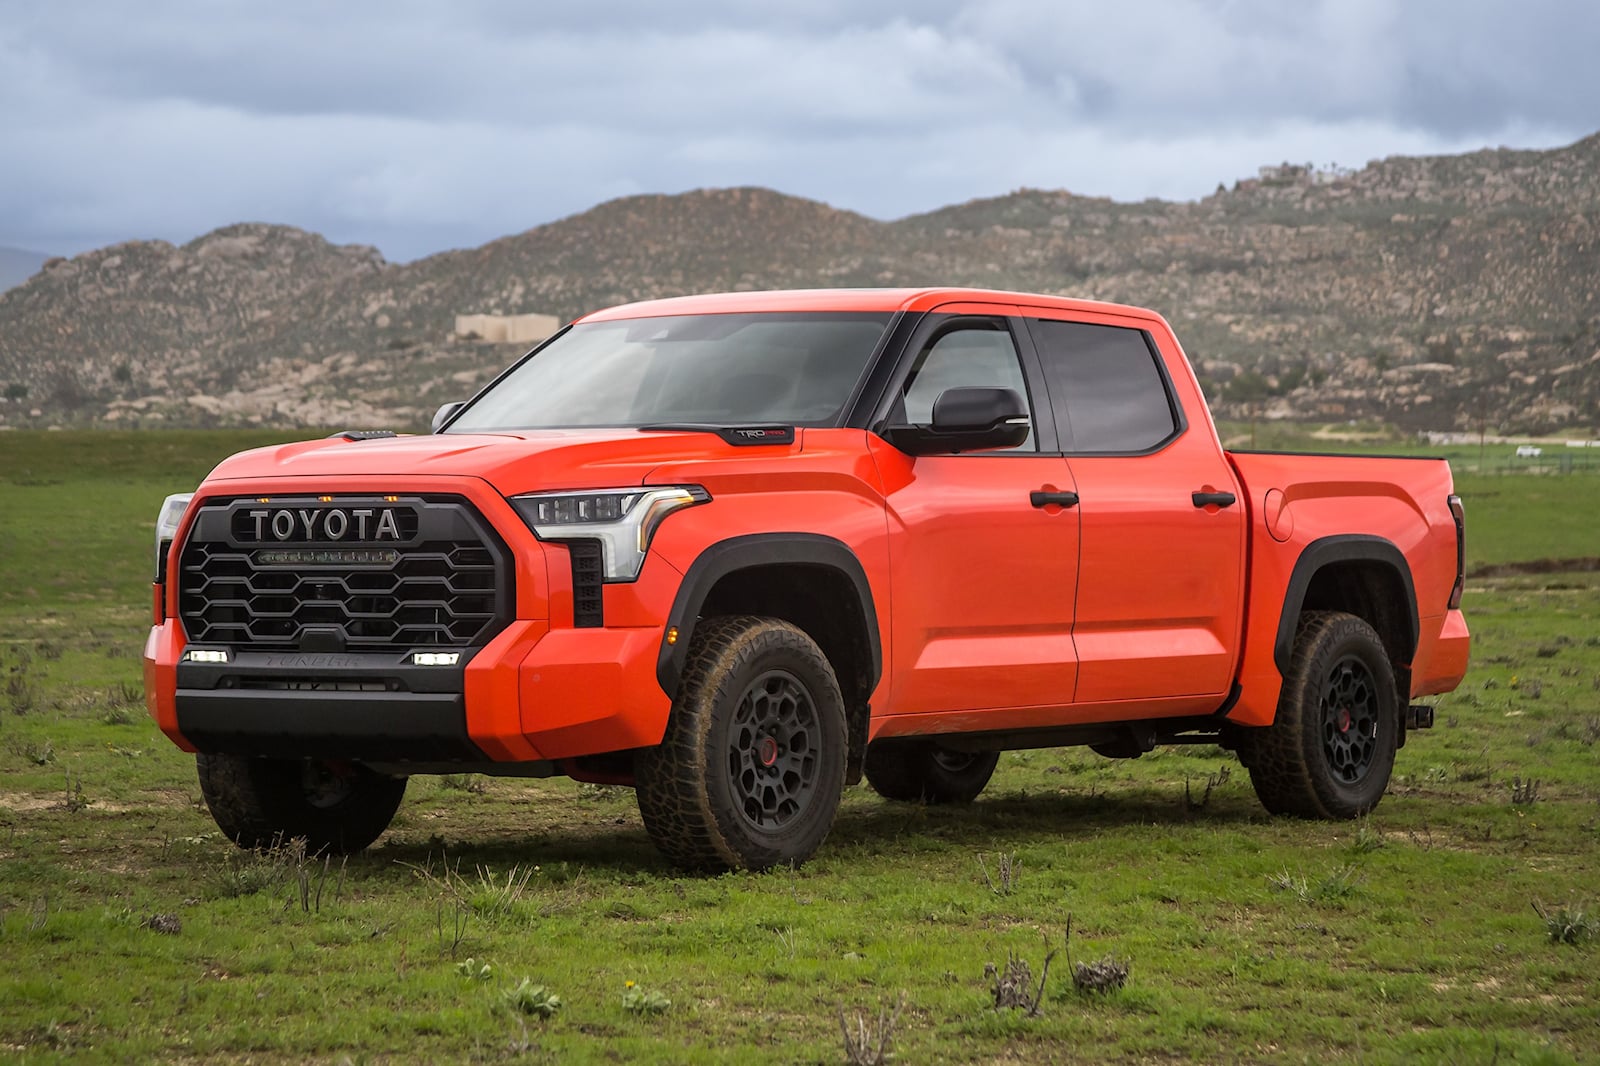 The 2023 Toyota Tundra parked in a grassy field